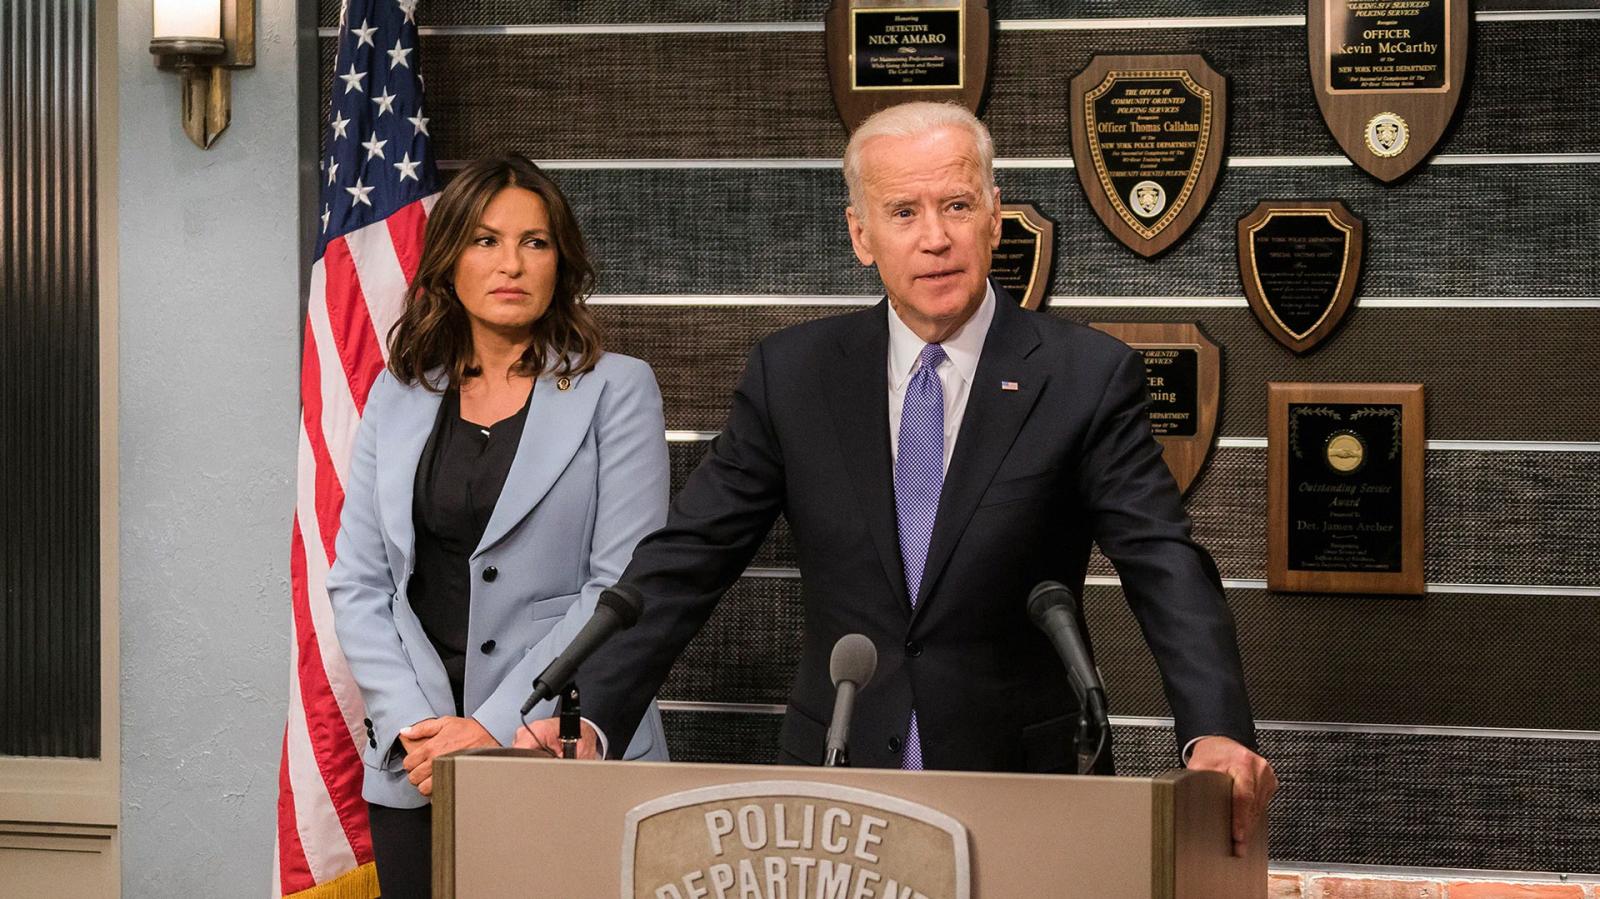 Did SVU Go Too Far? 7 Controversial Guest Stars that Divided Fans - image 1